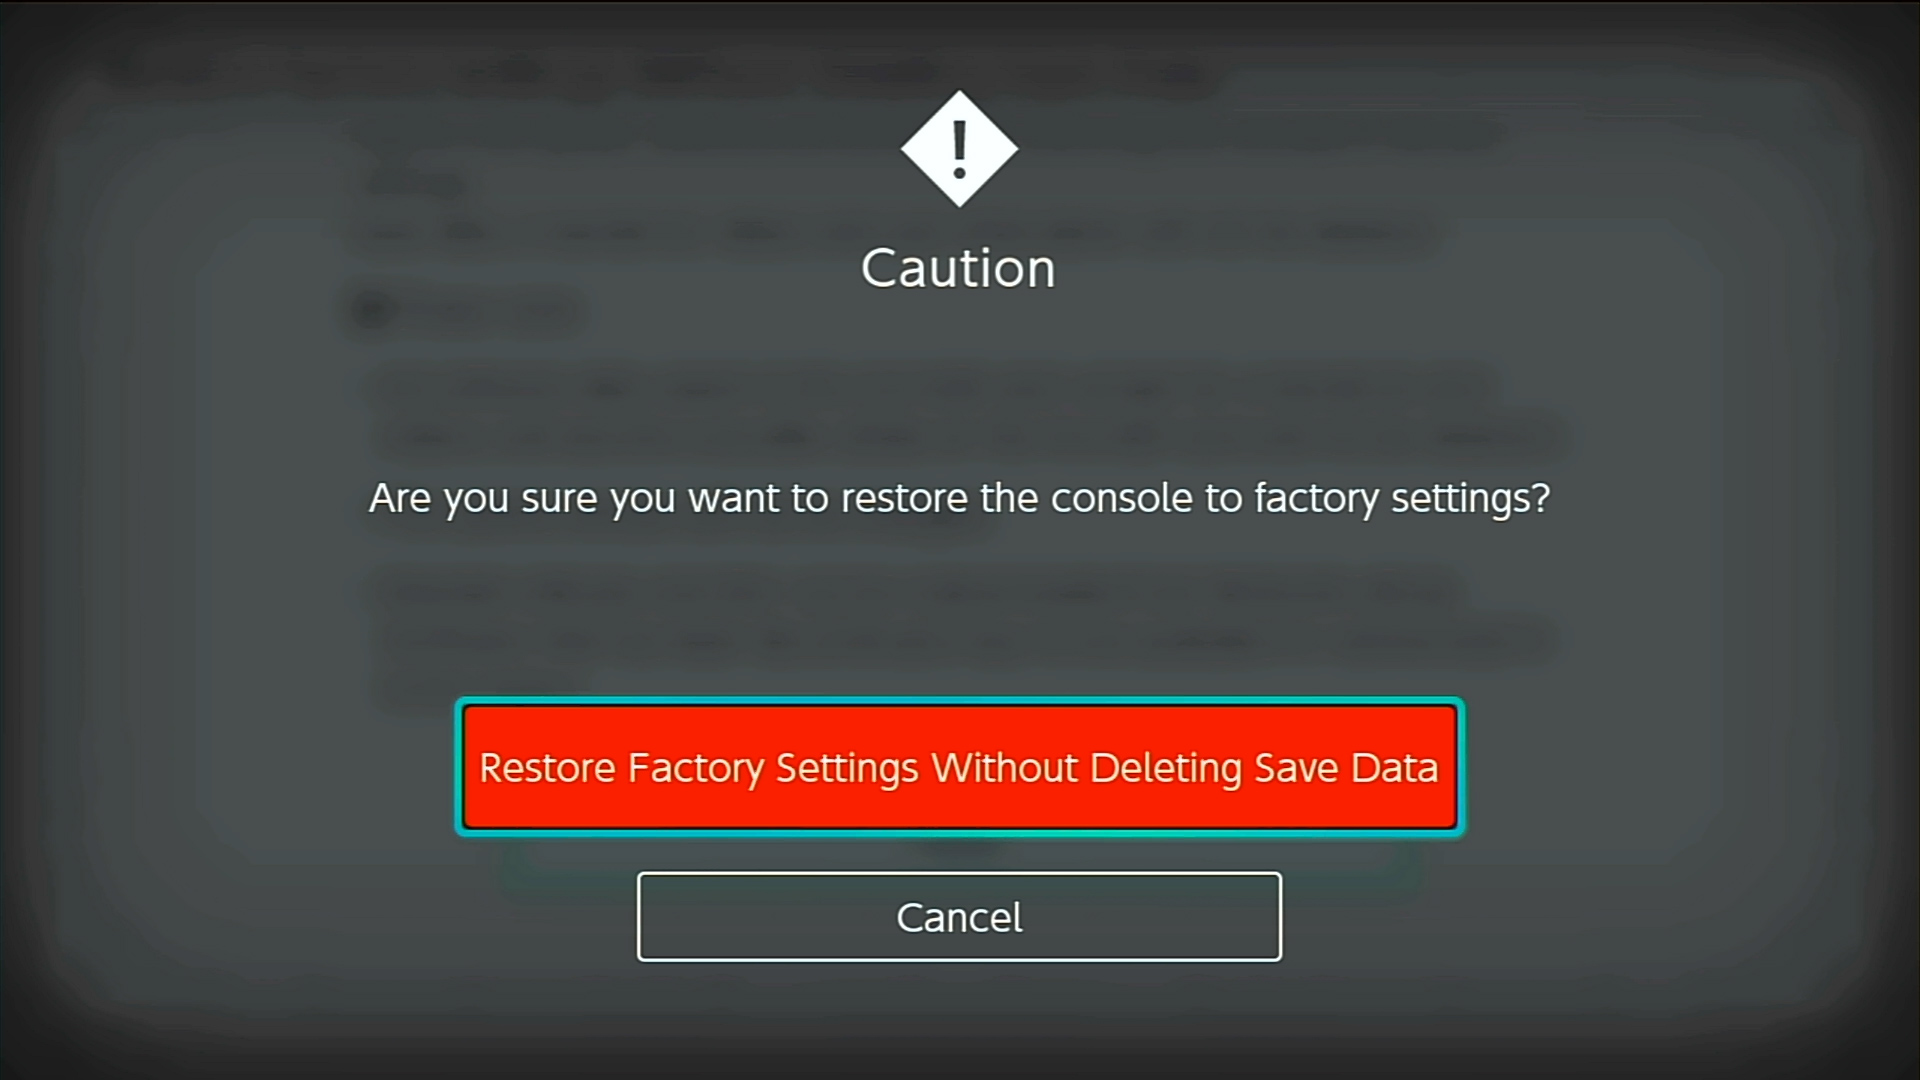 Restore Factory Settings Without deleting save data